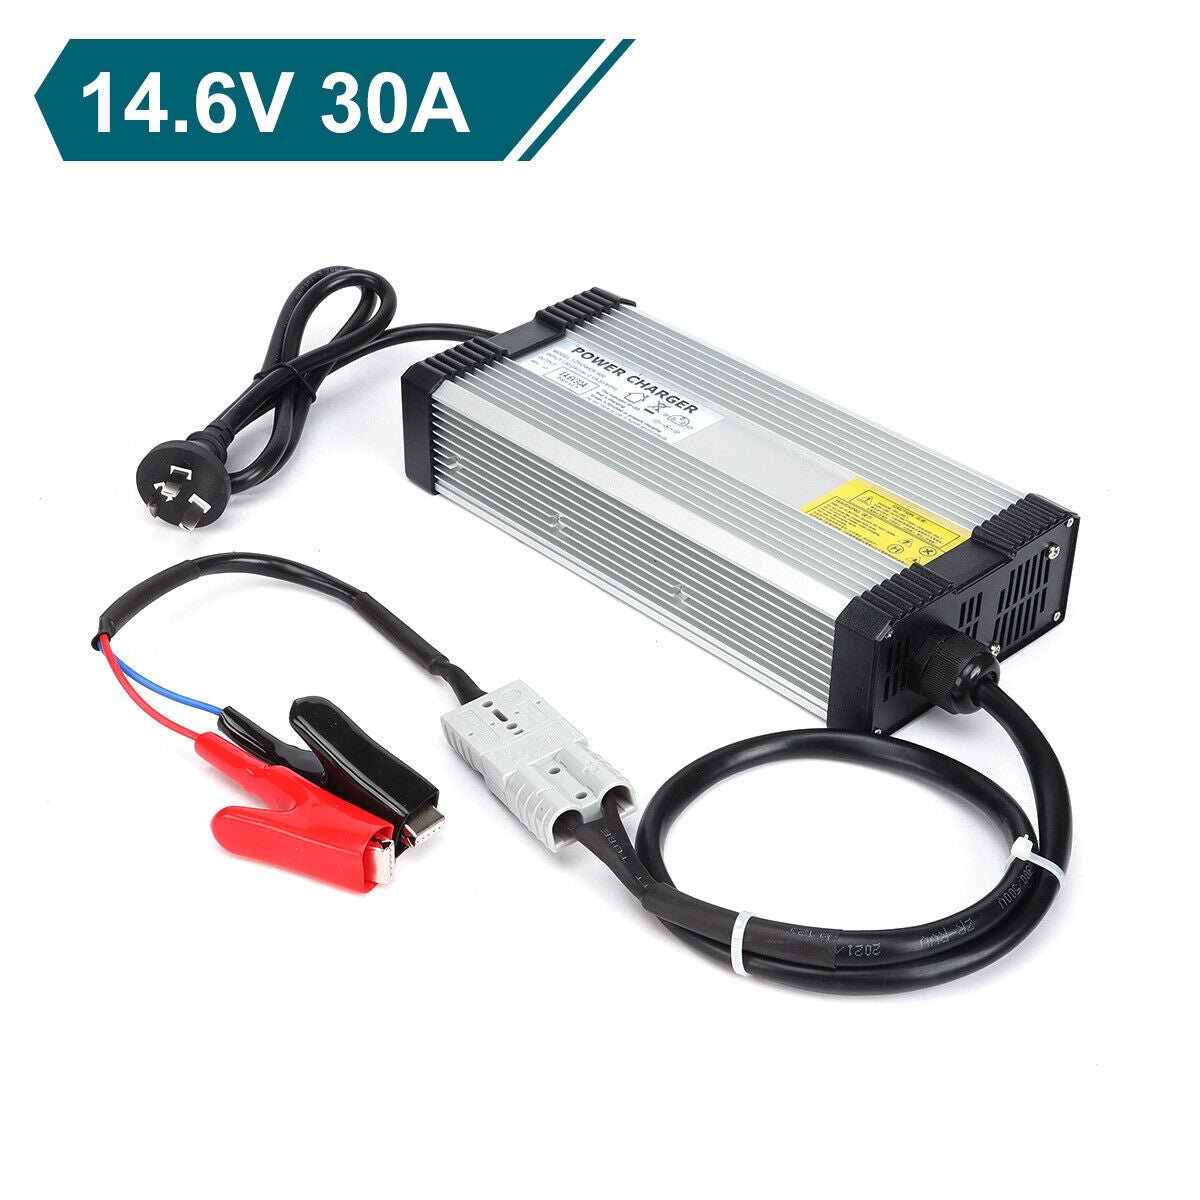 14.6V 12V 30A Lithium Battery Charger For LiFePO4 Lithium Iron Plug Kit - Office Catch